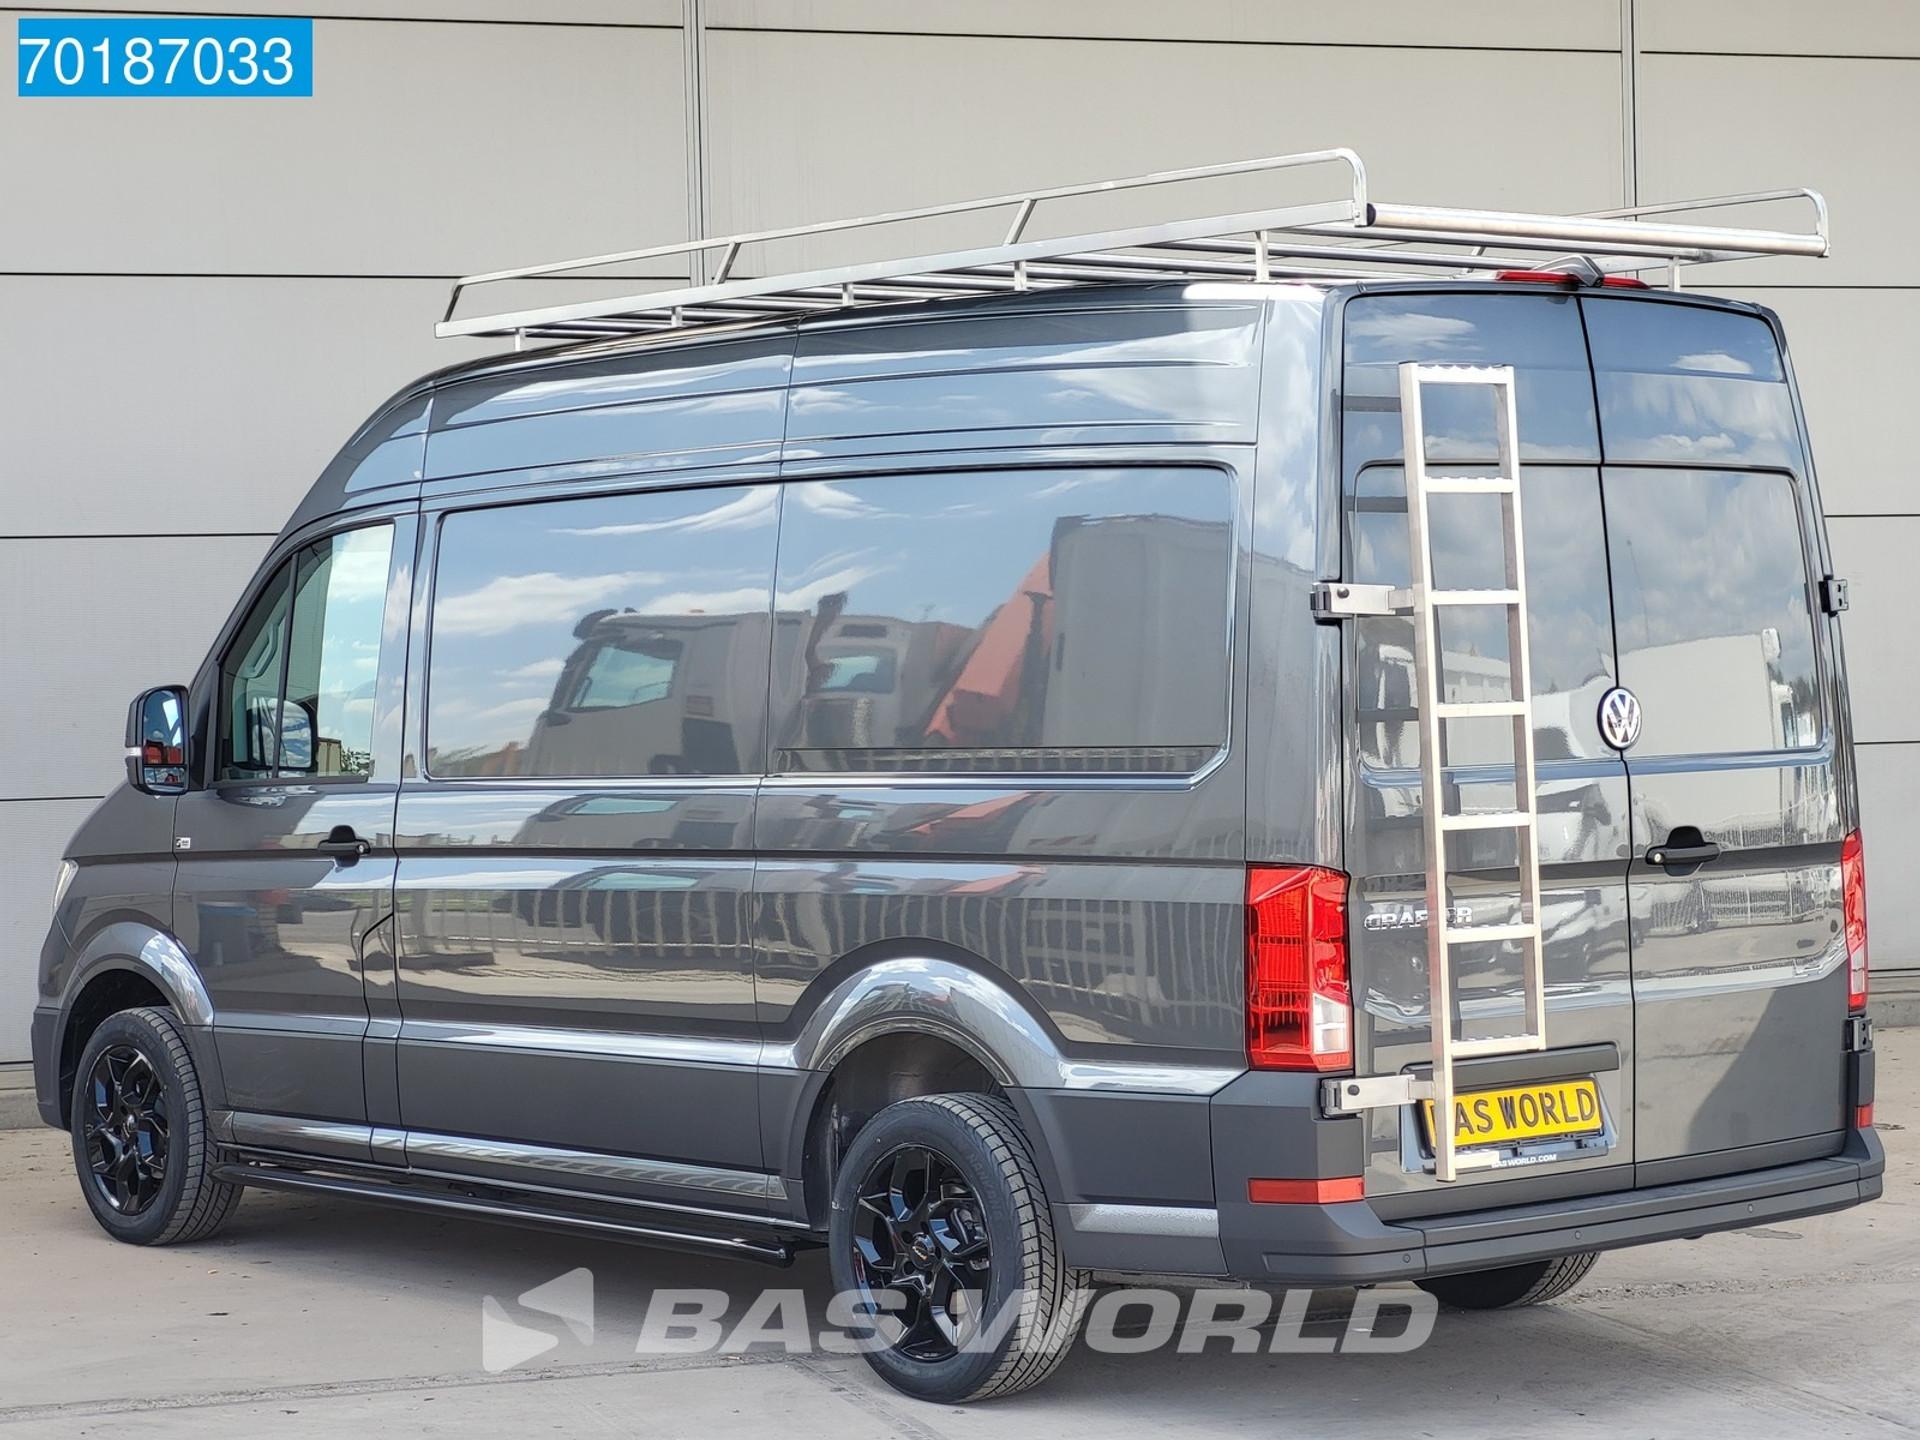 Foto 3 van Volkswagen Crafter 140pk Automaat L3H3 Imperiaal 18''Velgen Sidebars ACC LED Airco Cruise L2H2 11m3 Airco